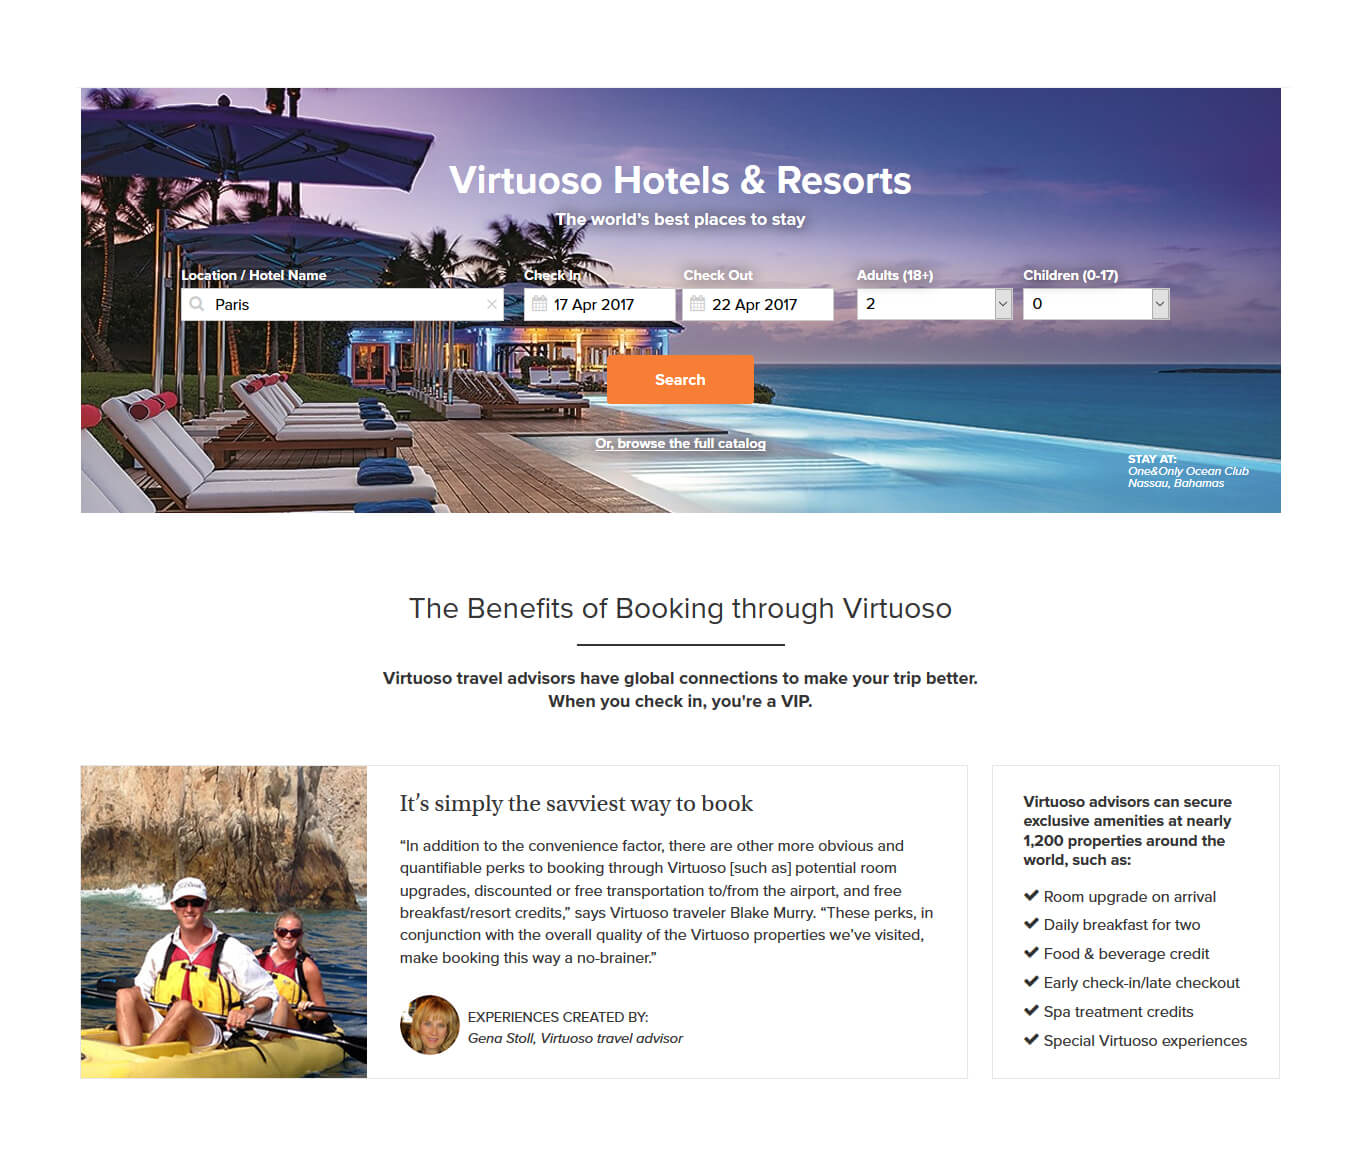 Virtuoso launches hotel booking tool